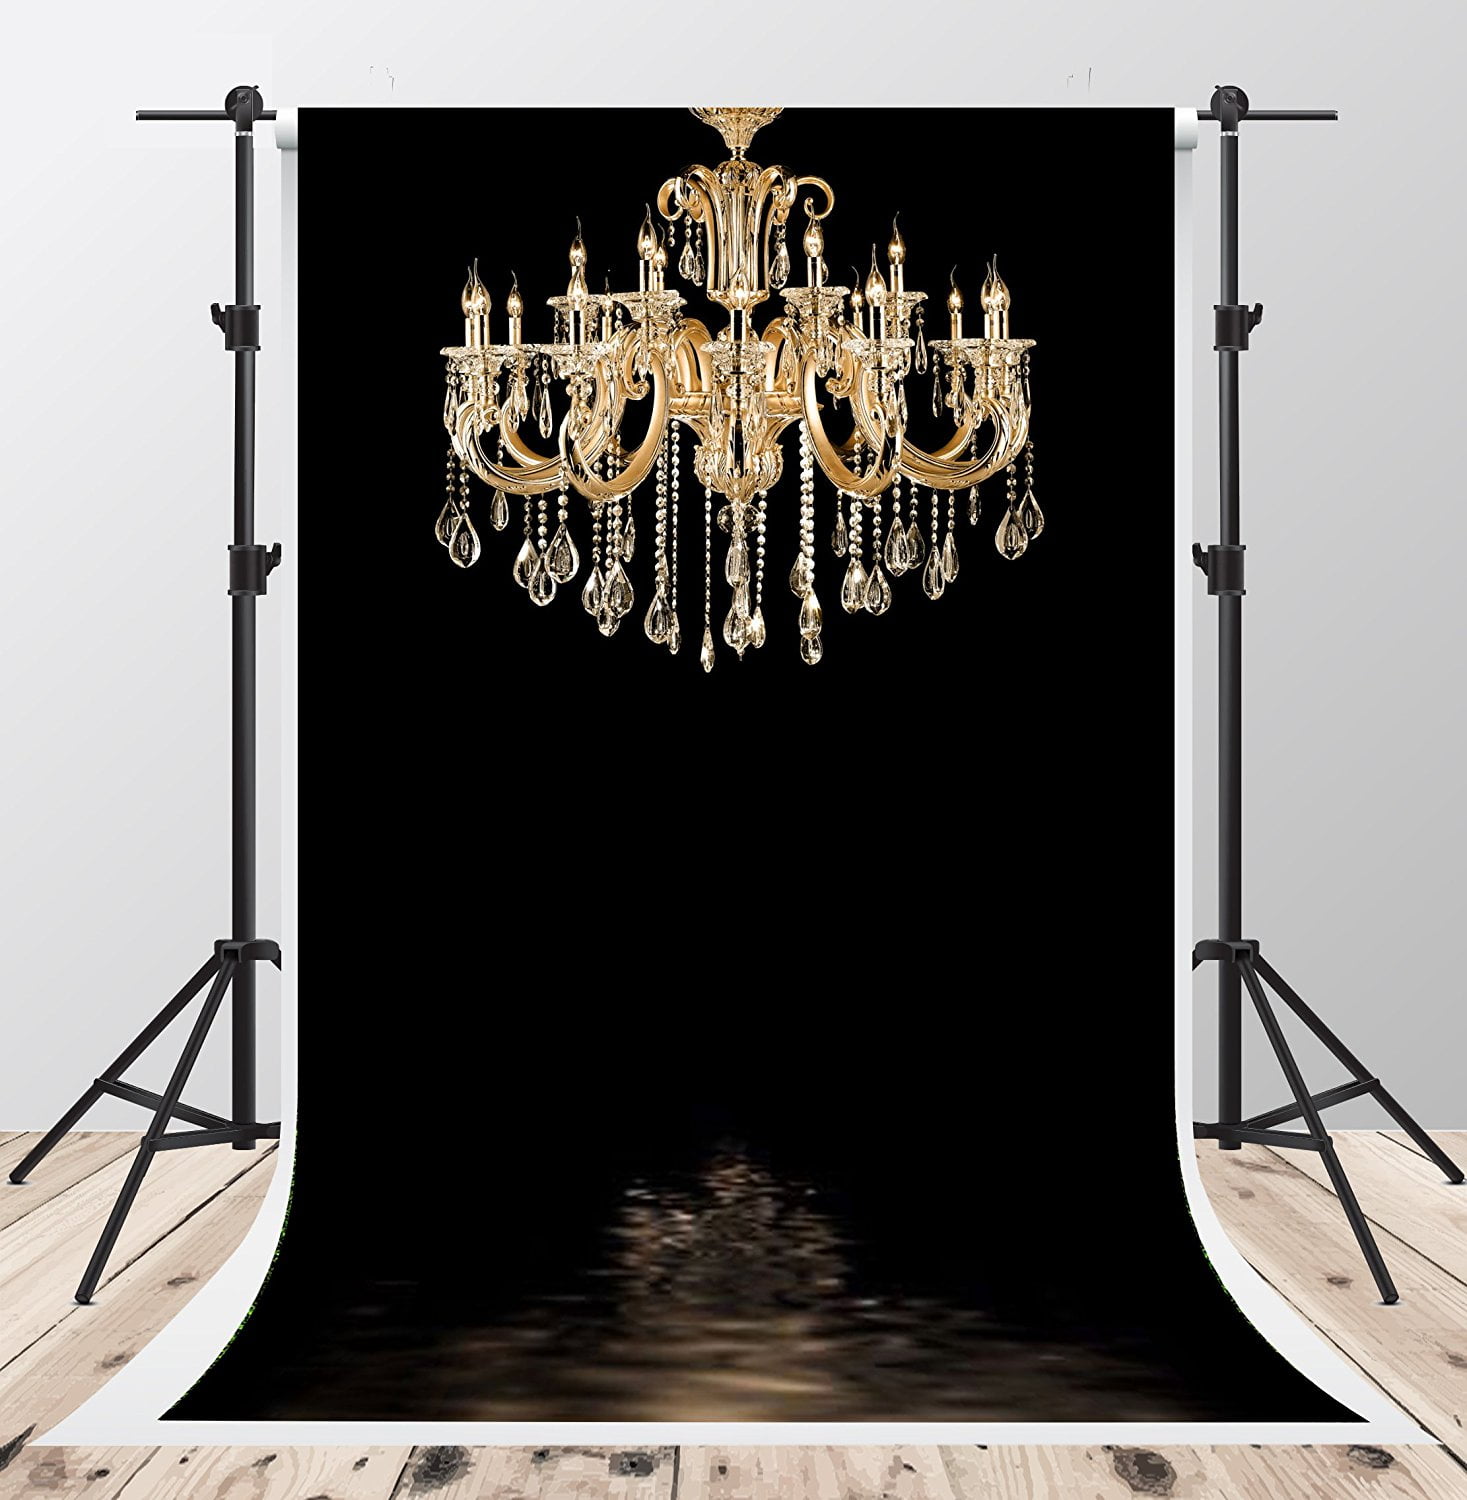 5x7ft Vintage Room Lights Piano Photography Background Computer-Printed Vinyl Backdrops 